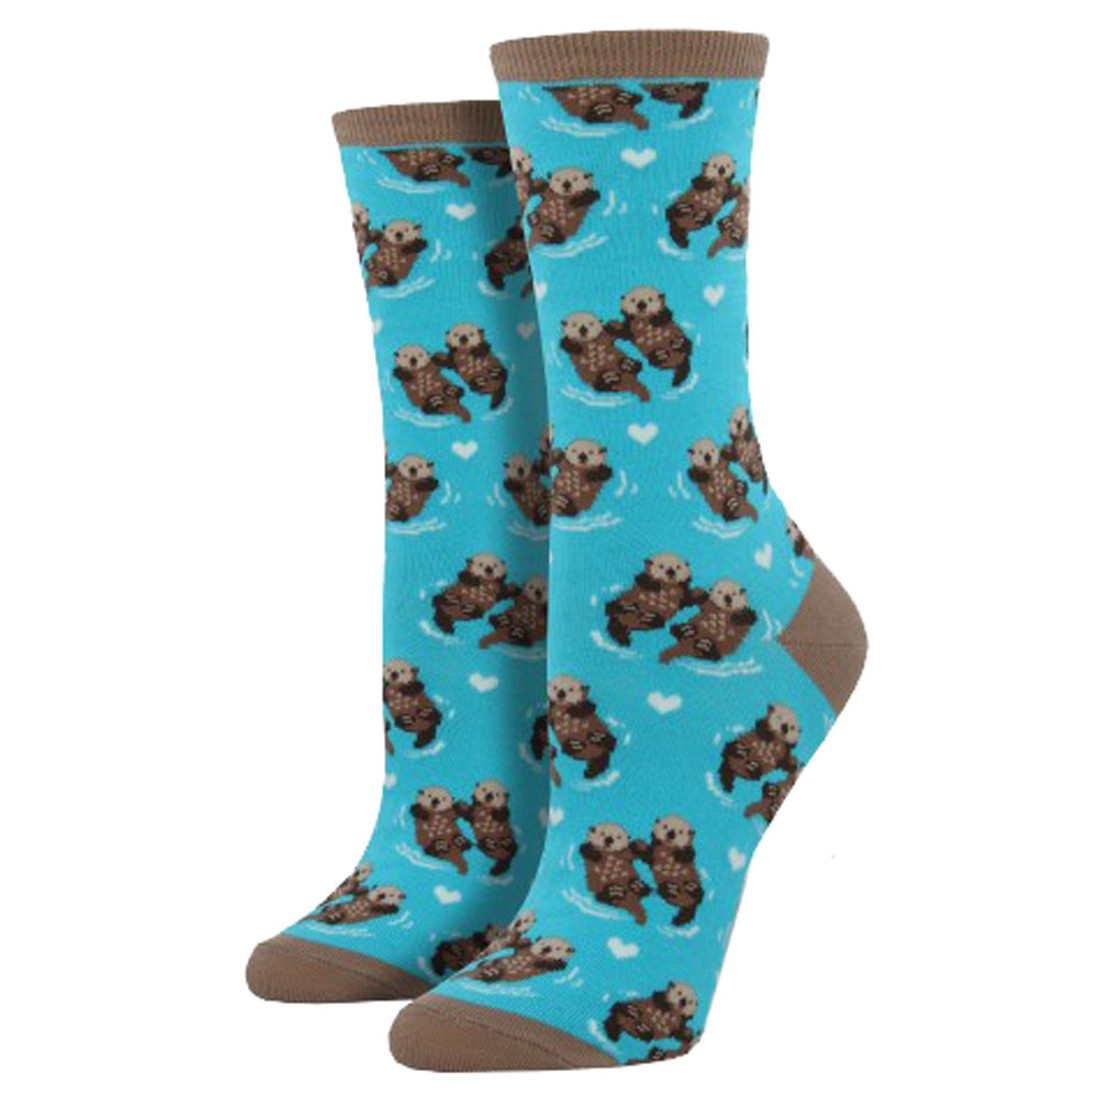 Women's Crew Socks Significant Otter Turquoise Blue